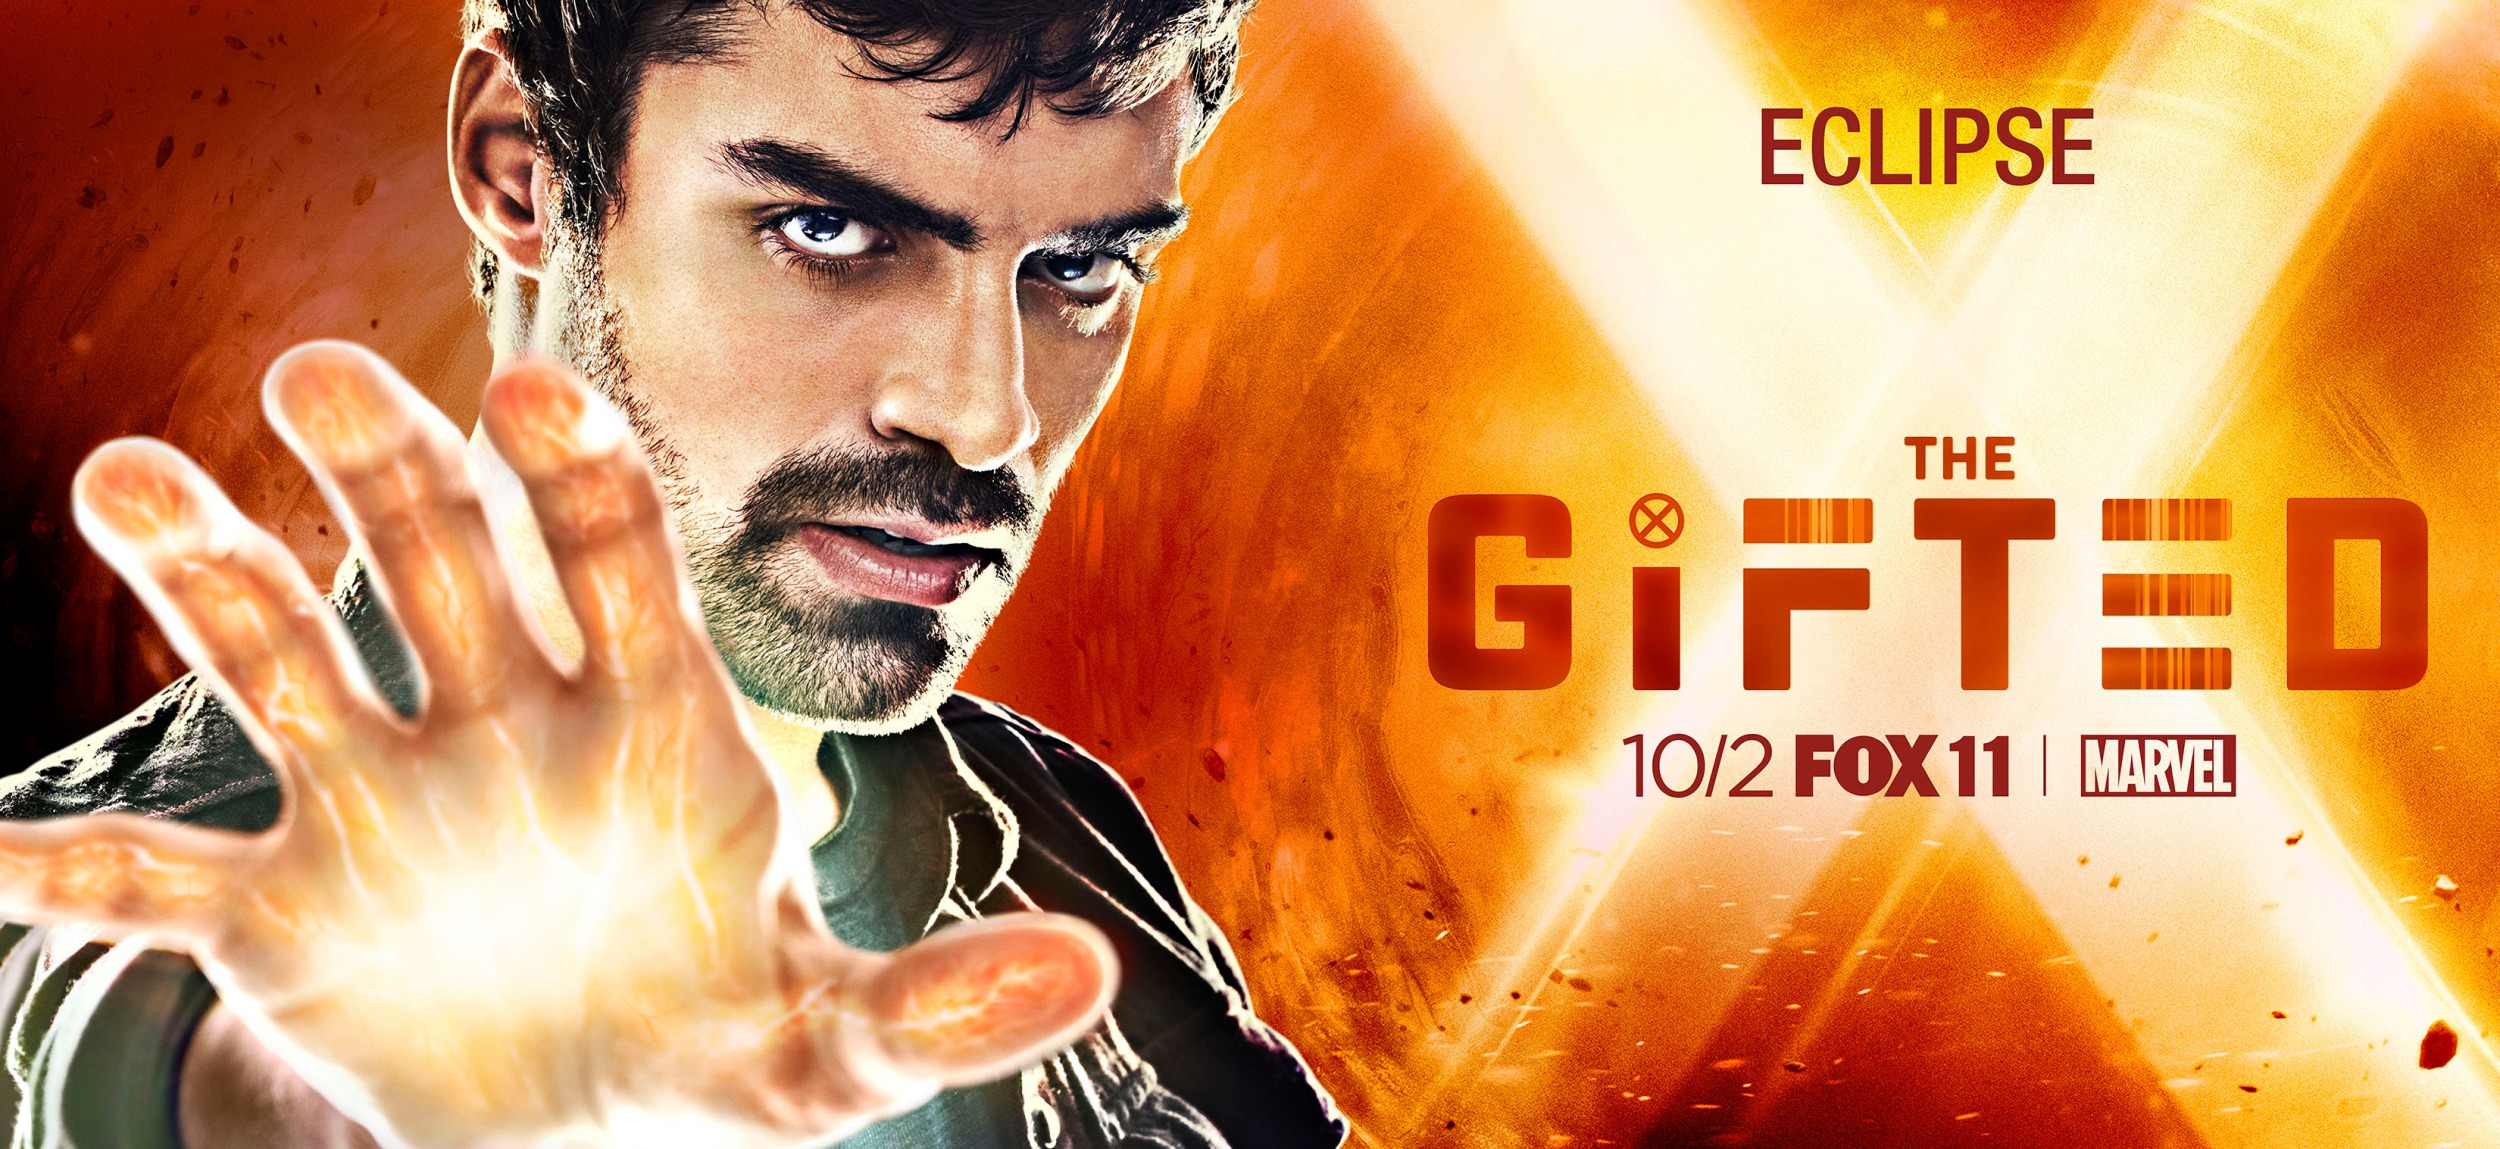 Mega Sized TV Poster Image for The Gifted (#4 of 13)